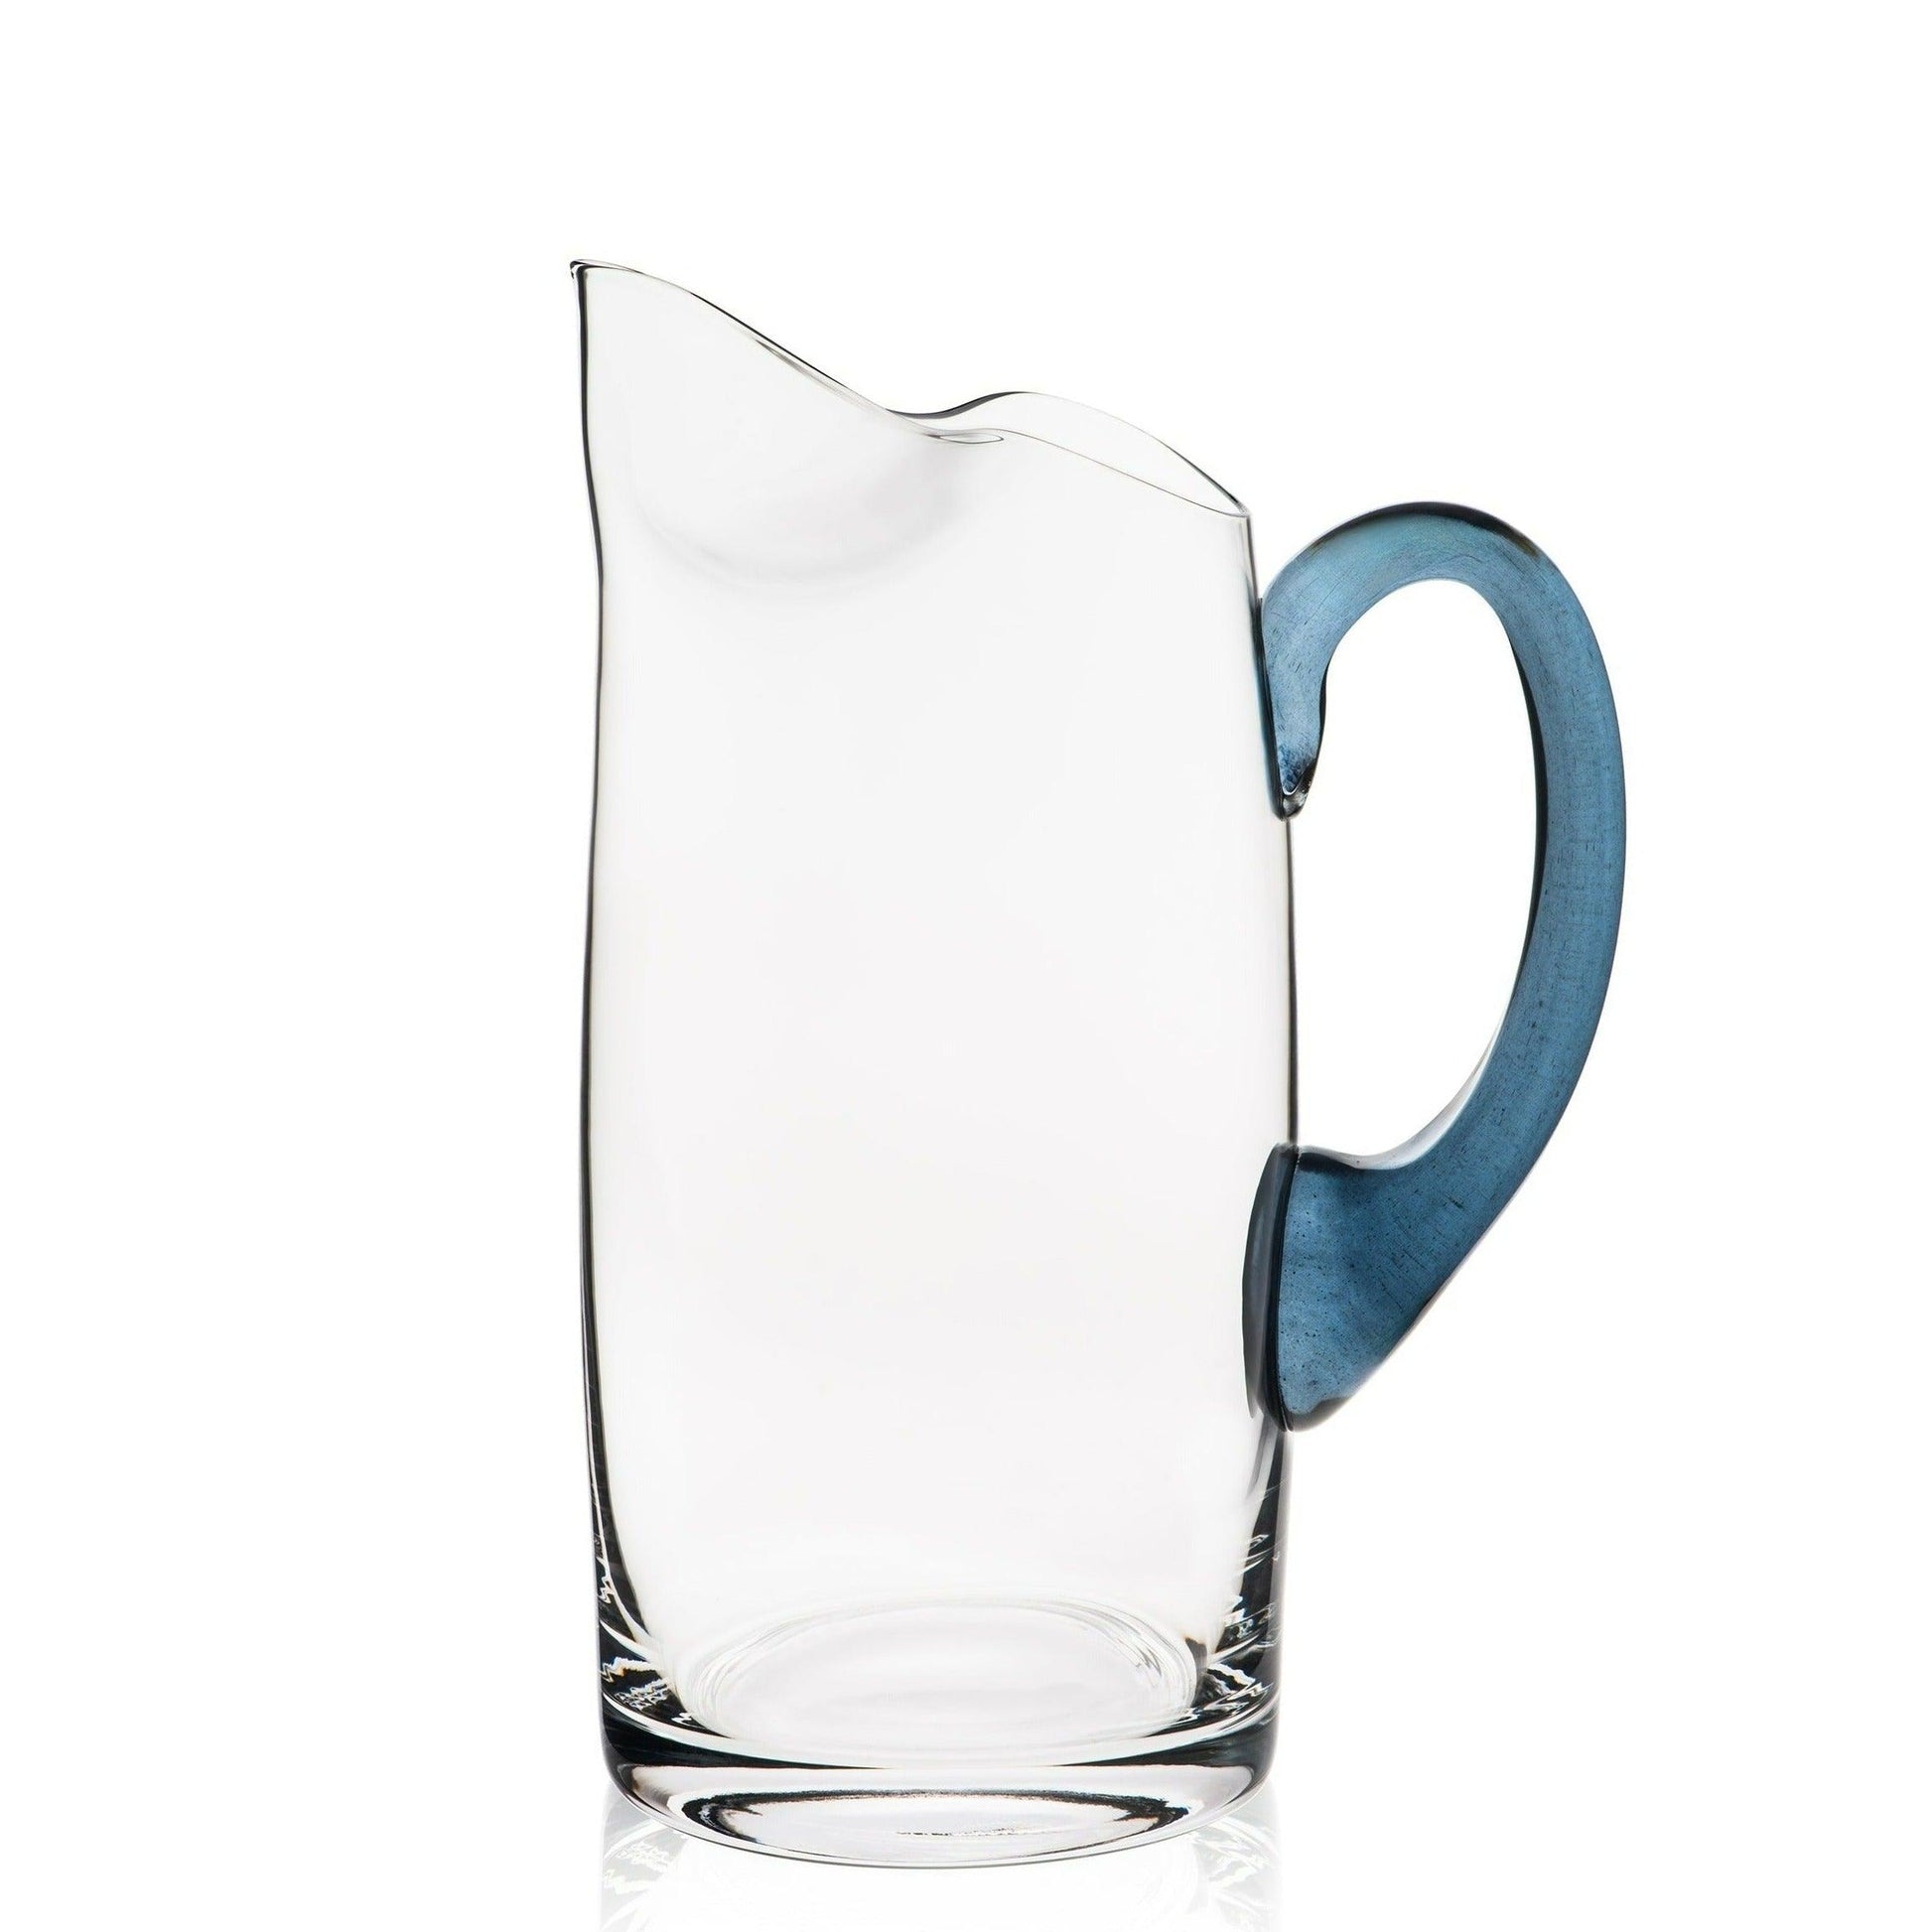 a glass pitcher with a blue handle on a white background